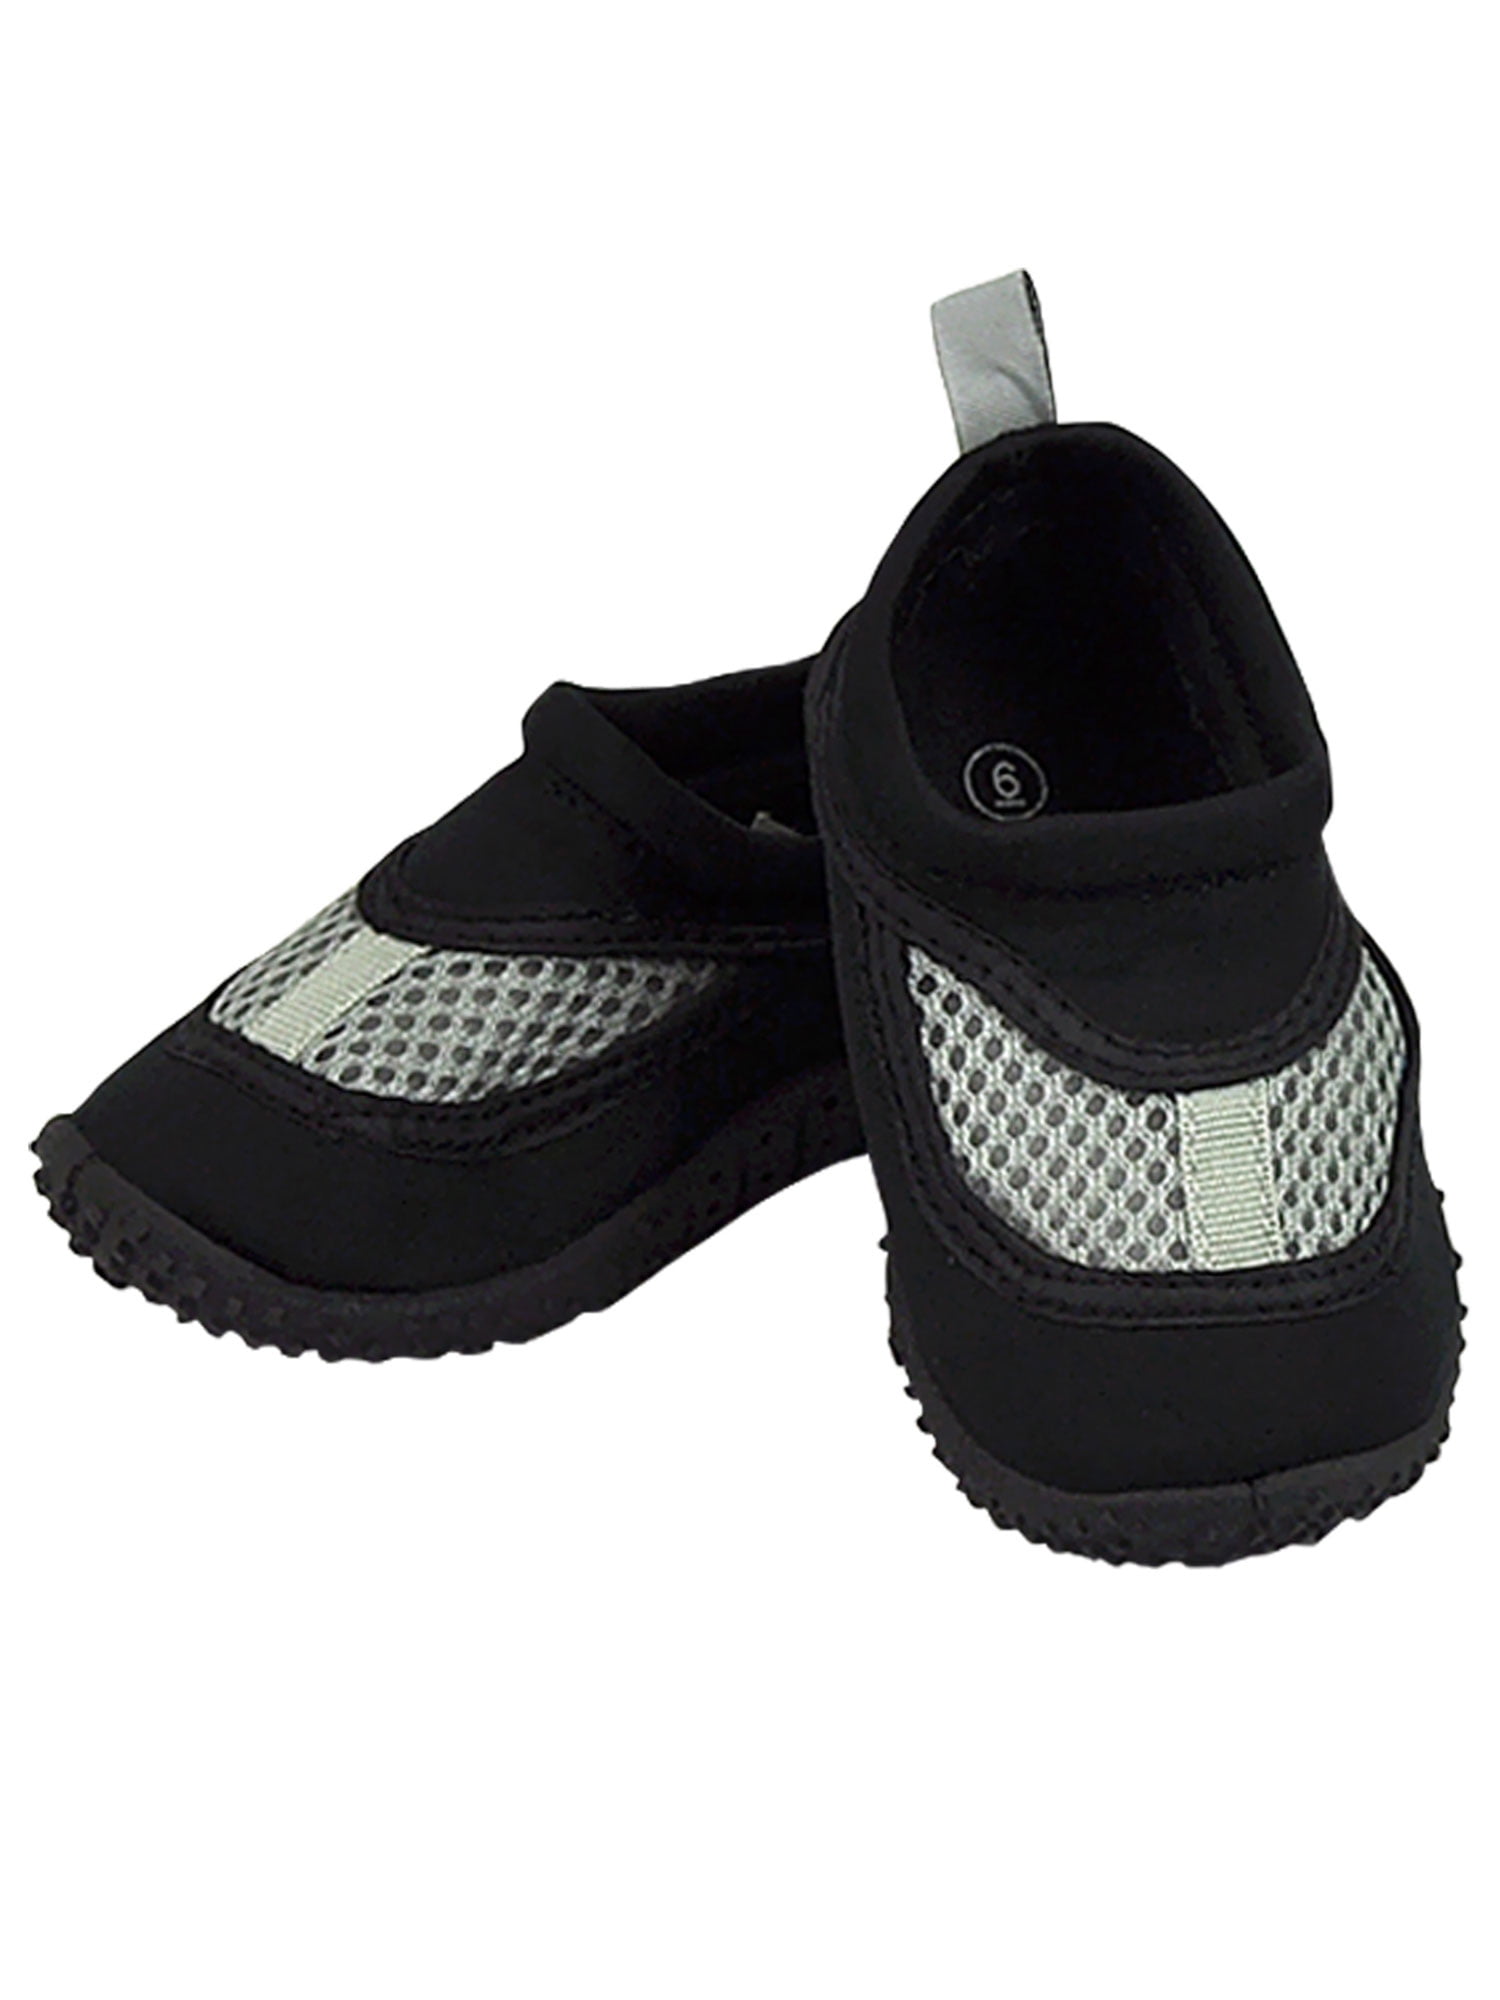 baby water shoes size 2